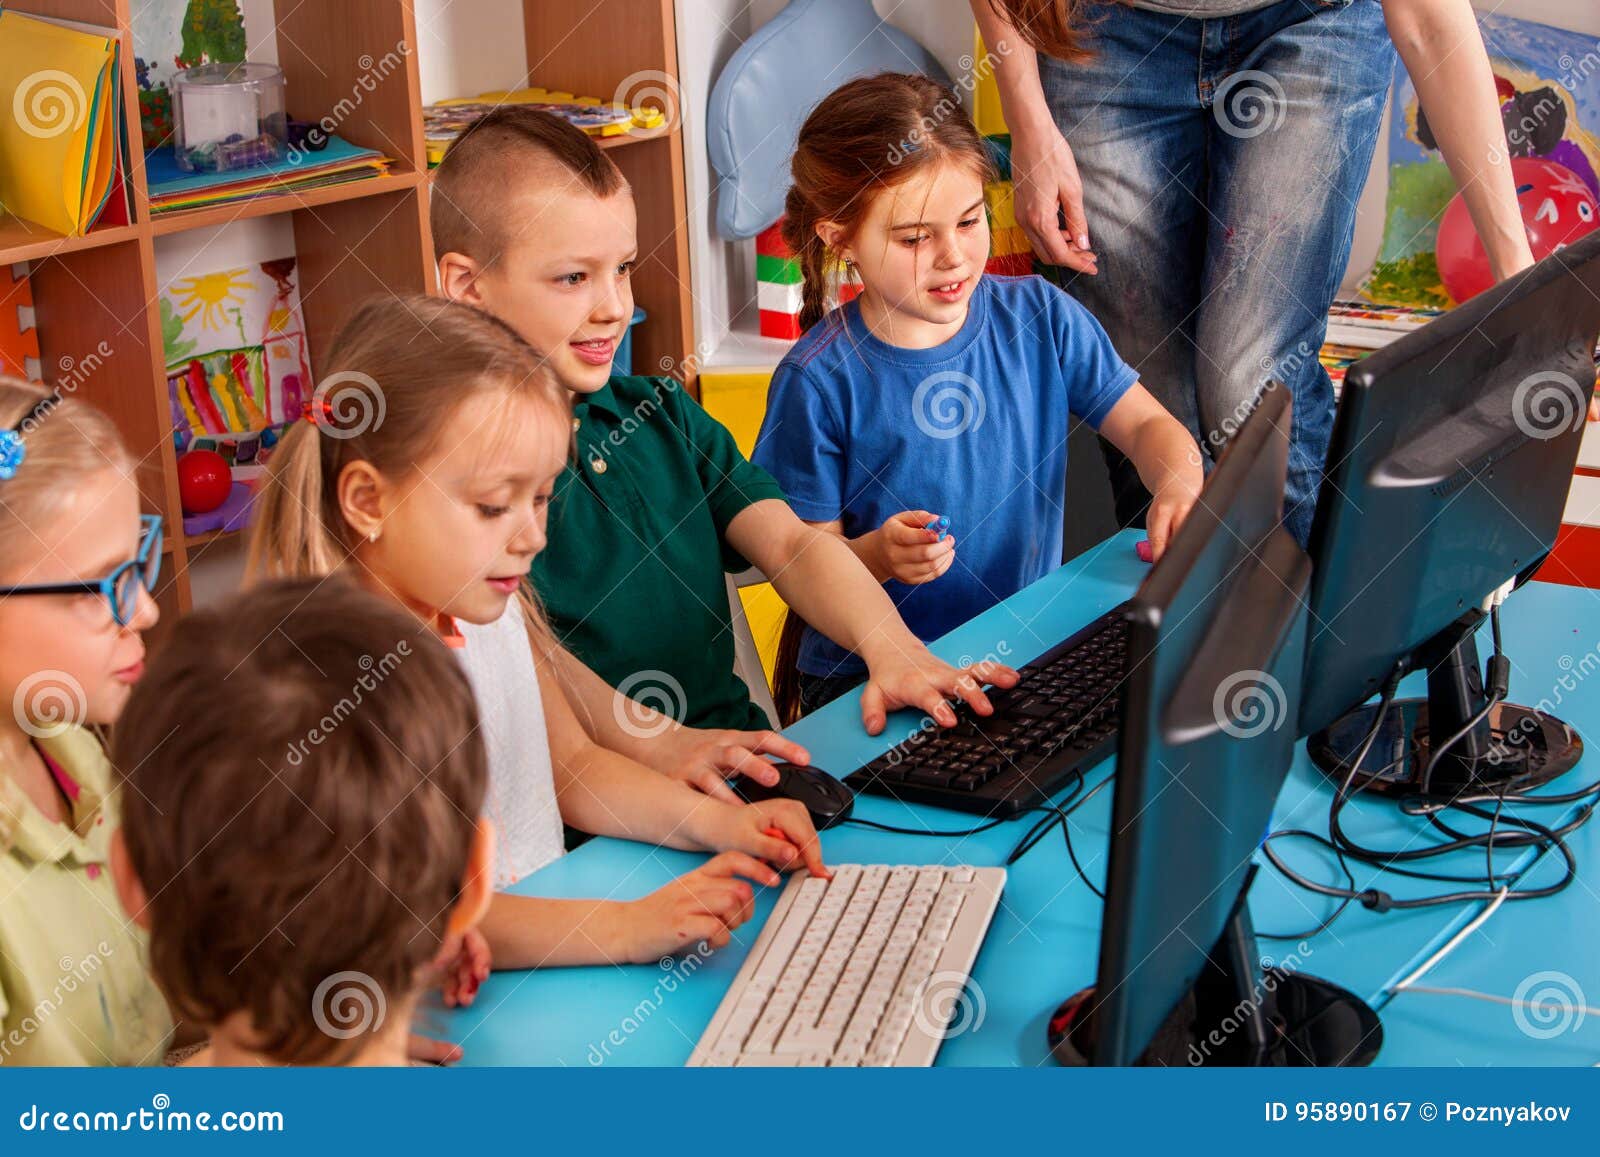 15 696 Class Game Photos Free Royalty Free Stock Photos From Dreamstime